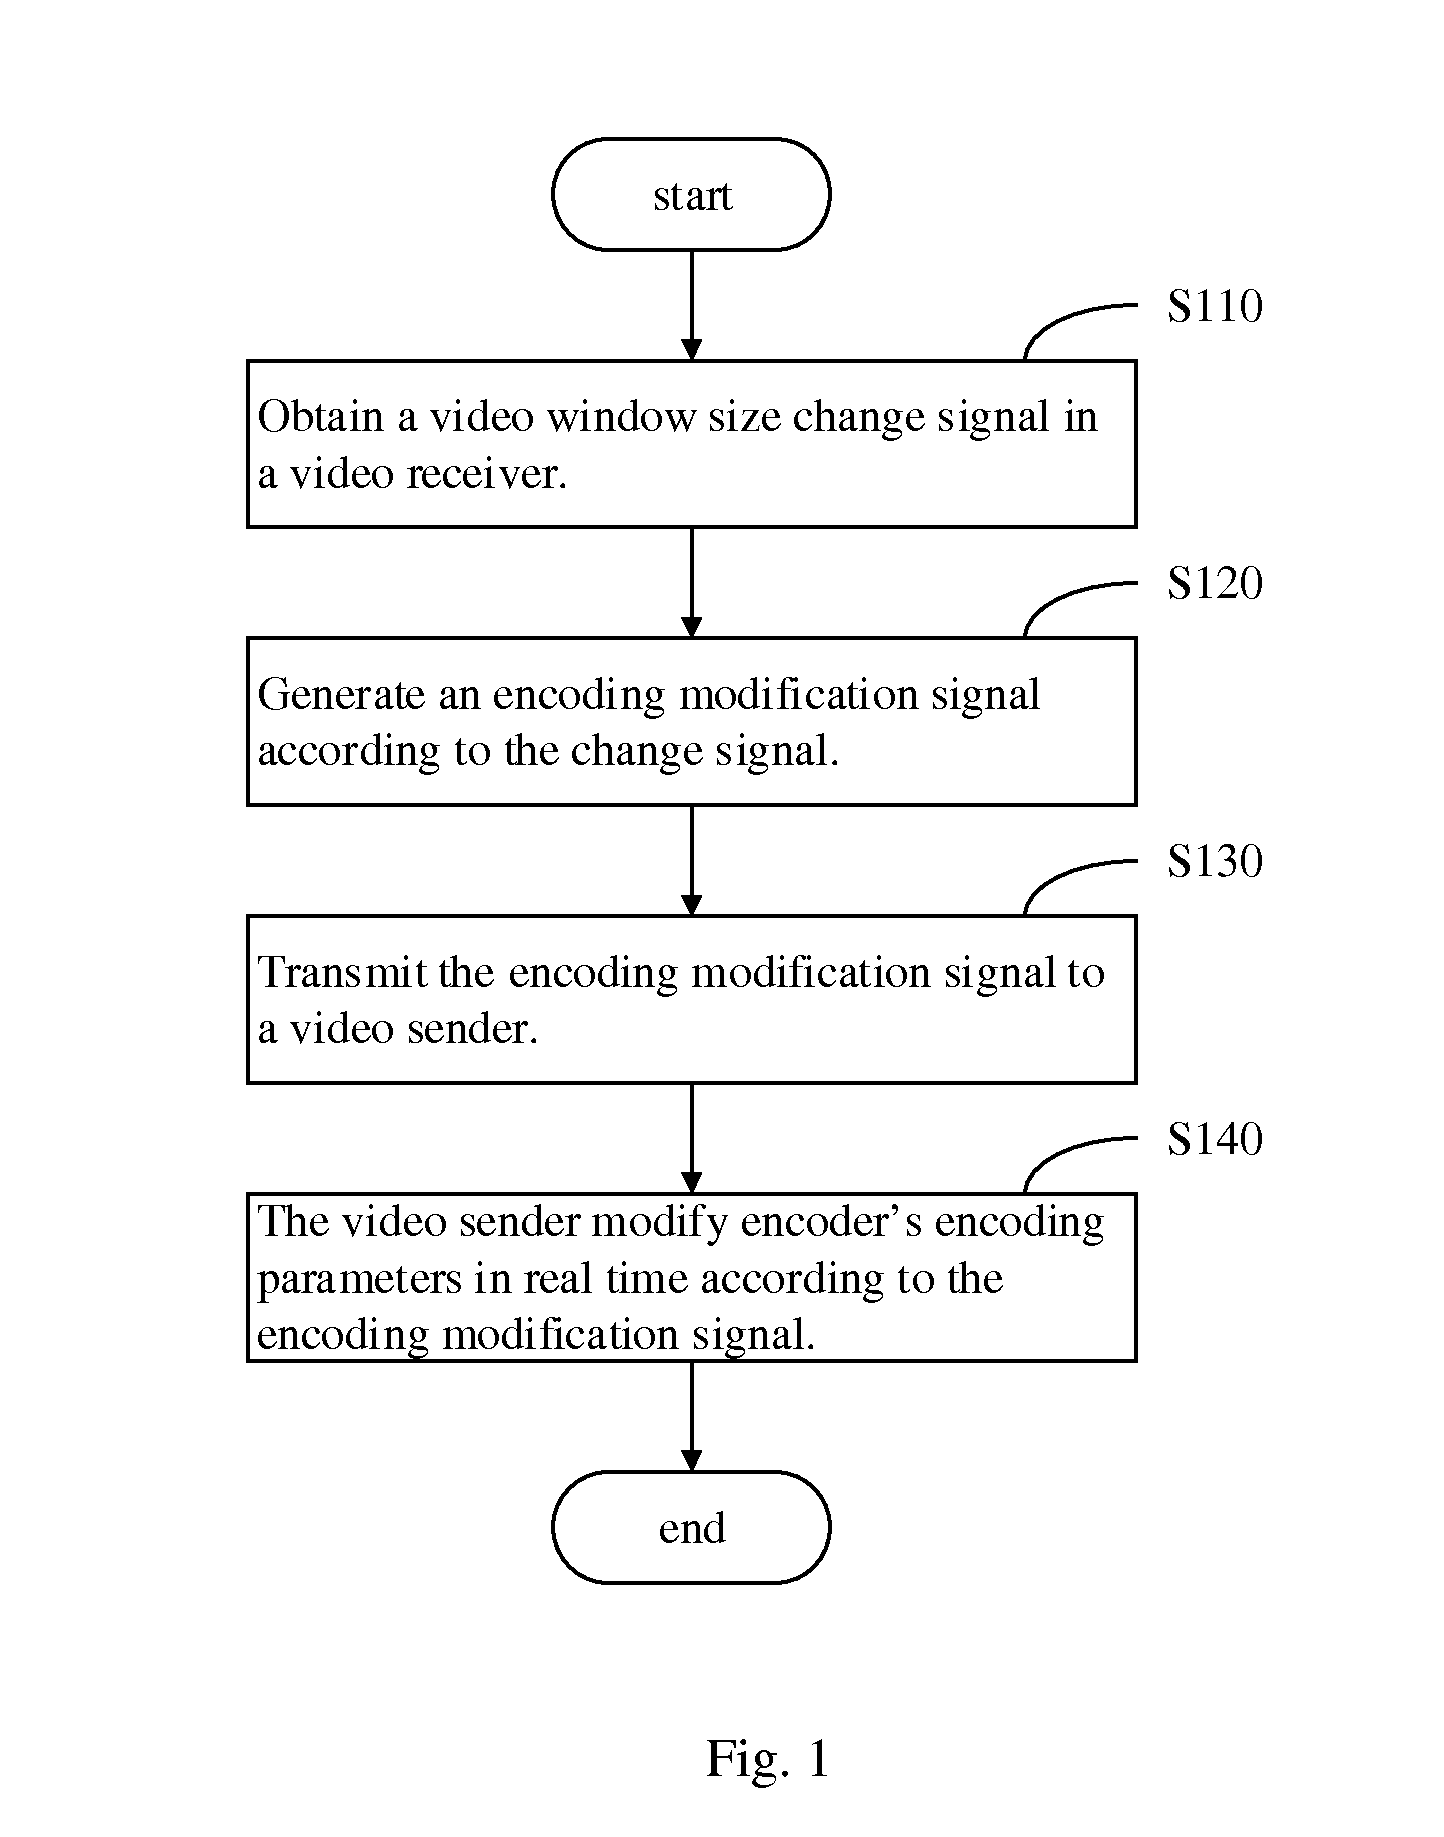 Video communication method and system for dynamically modifying video encoding